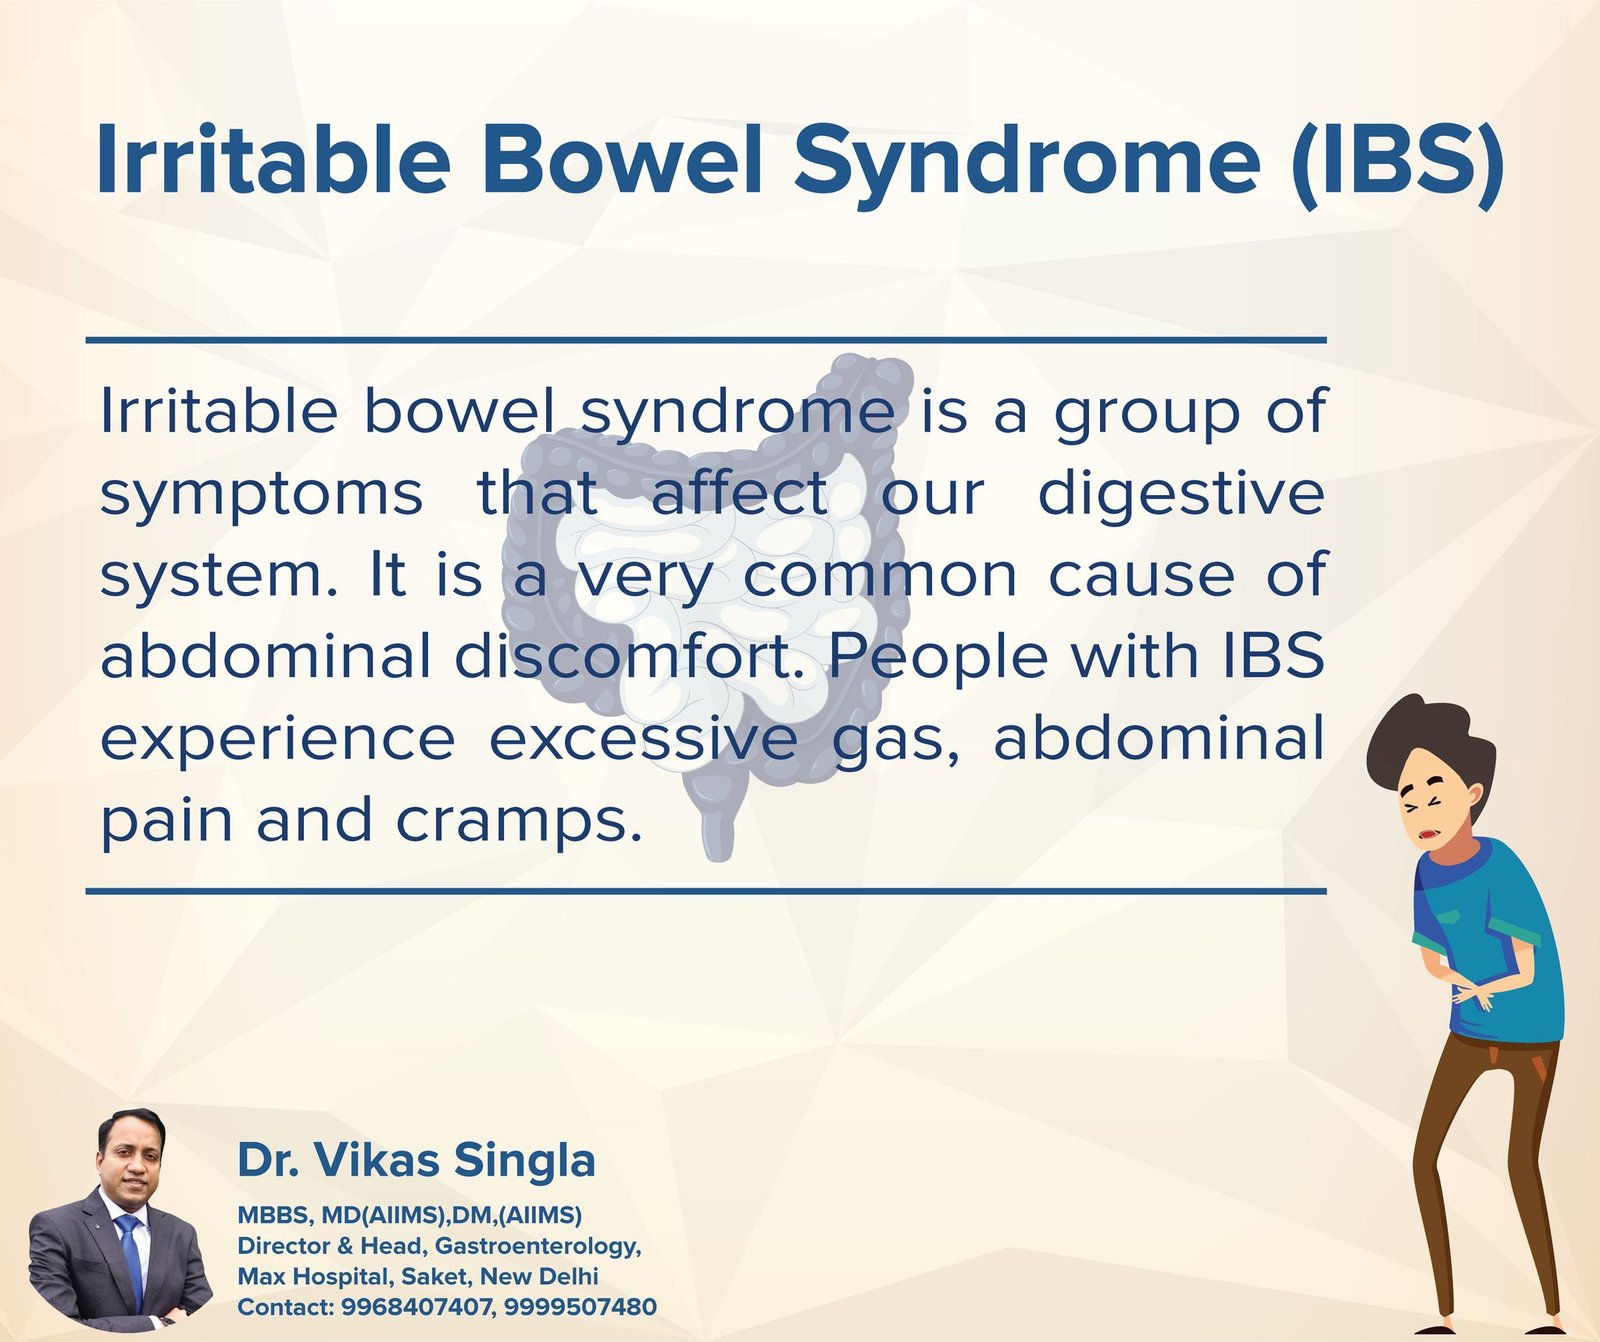 Irritable Bowel Syndrome (IBS): Causes, Symptoms and Treatment